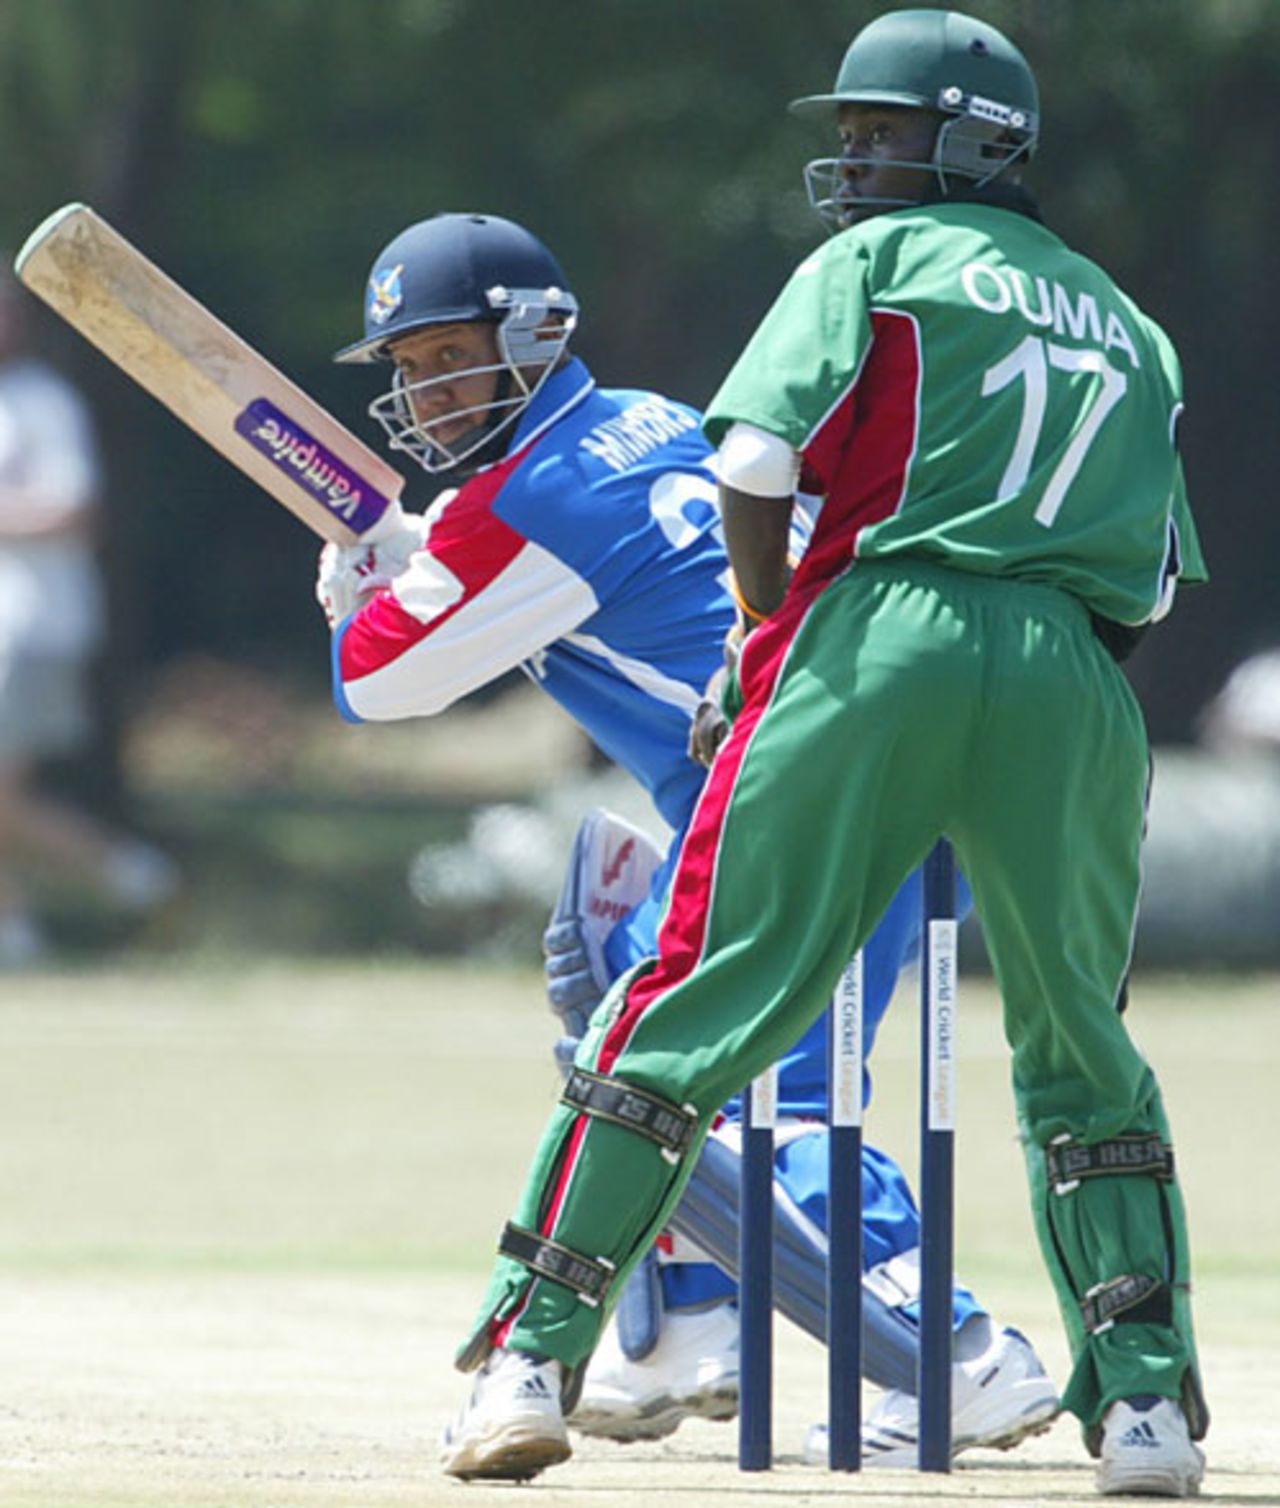 Dean Minors on his way to 52 - only two other batsmen reached double figures, Kenya v Bermuda, World Cricket League,  Jaffreys SportsClub, Nairobi, January 29, 2007